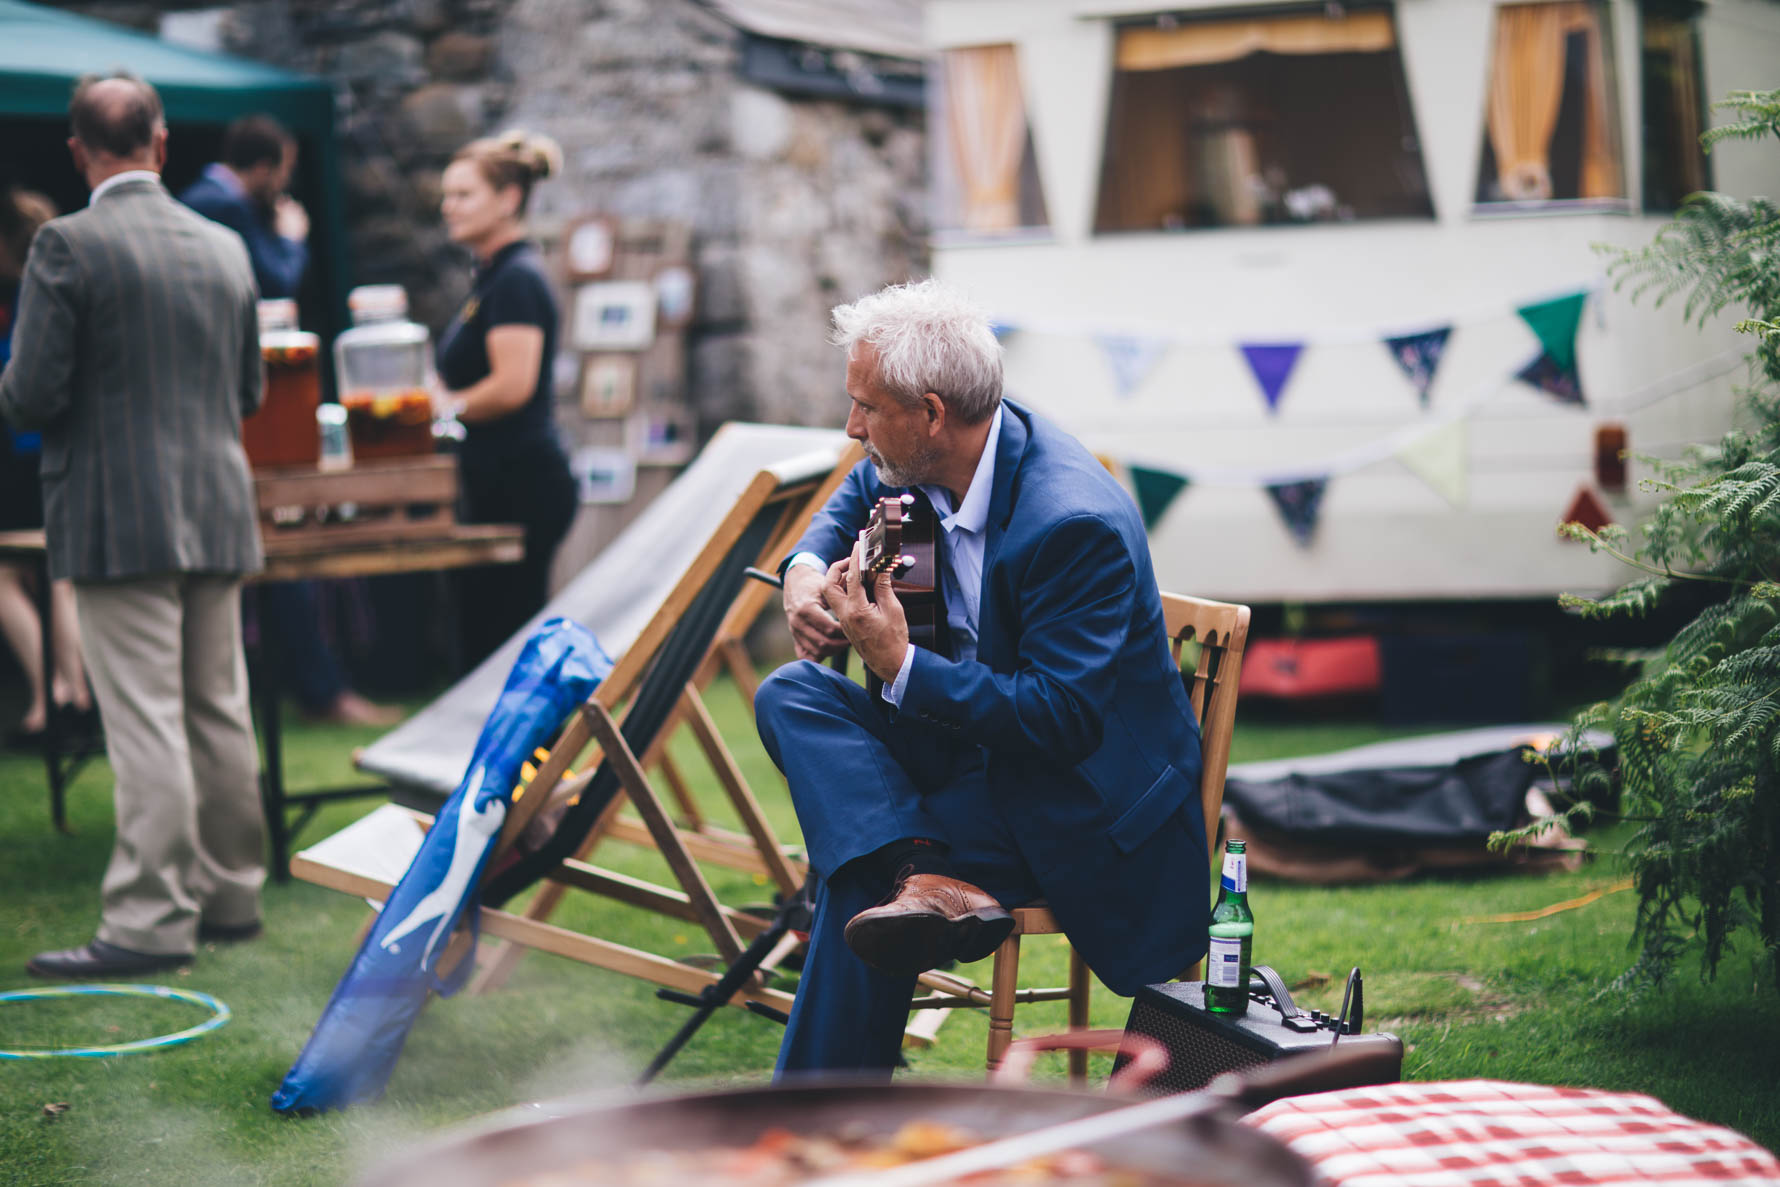 Man with grey hair and a blue suit sat on a chair outside playing a guitar